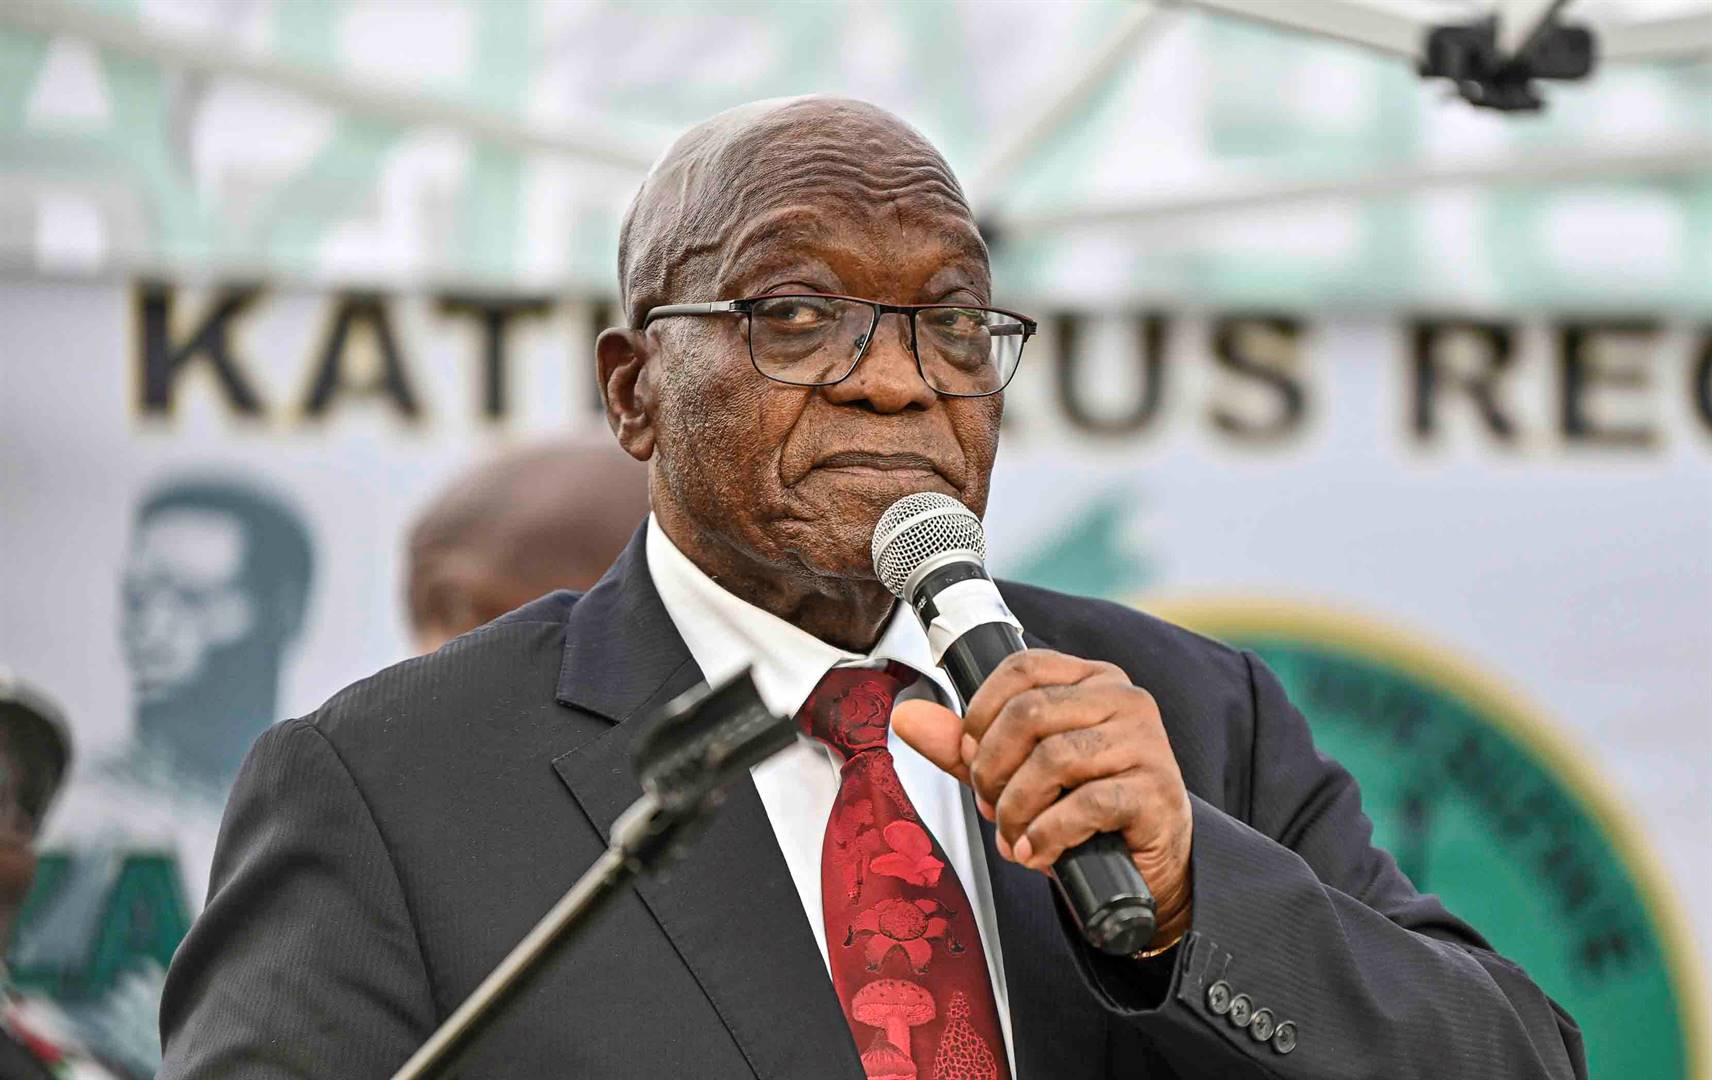 News24 | ConCourt grants Zuma's request for extension to file papers in his election candidacy case...